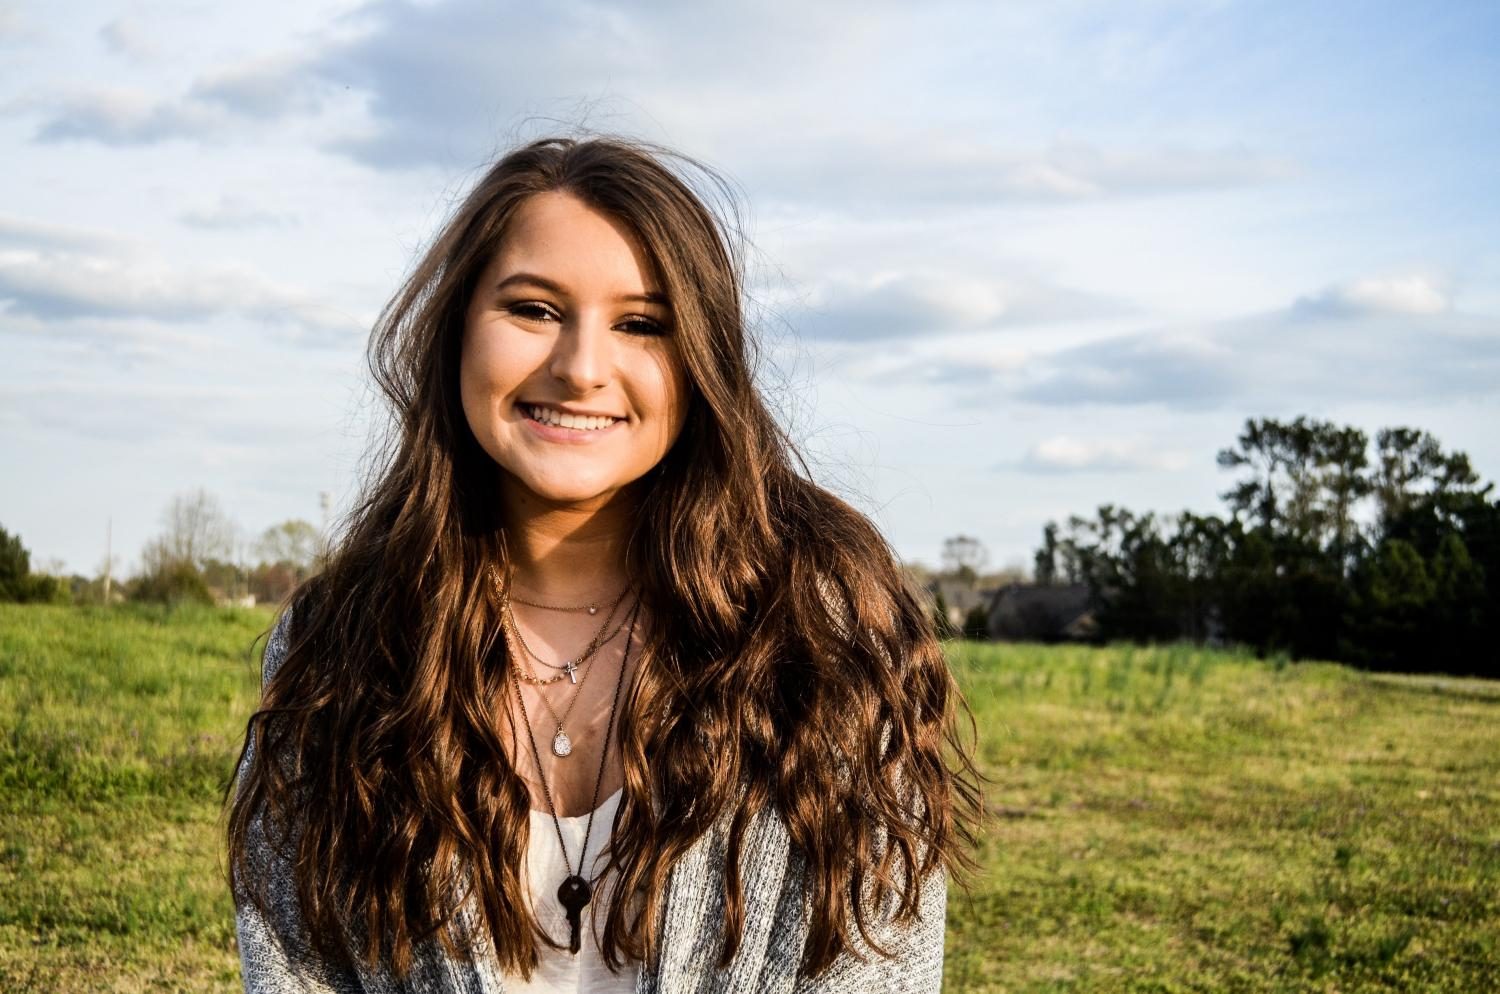 This situation has really had a powerful impact on me personally. Ever since my moms death, I have realized how short life is and I actively choose to not take anything for granted. - Emily Gaggstatter